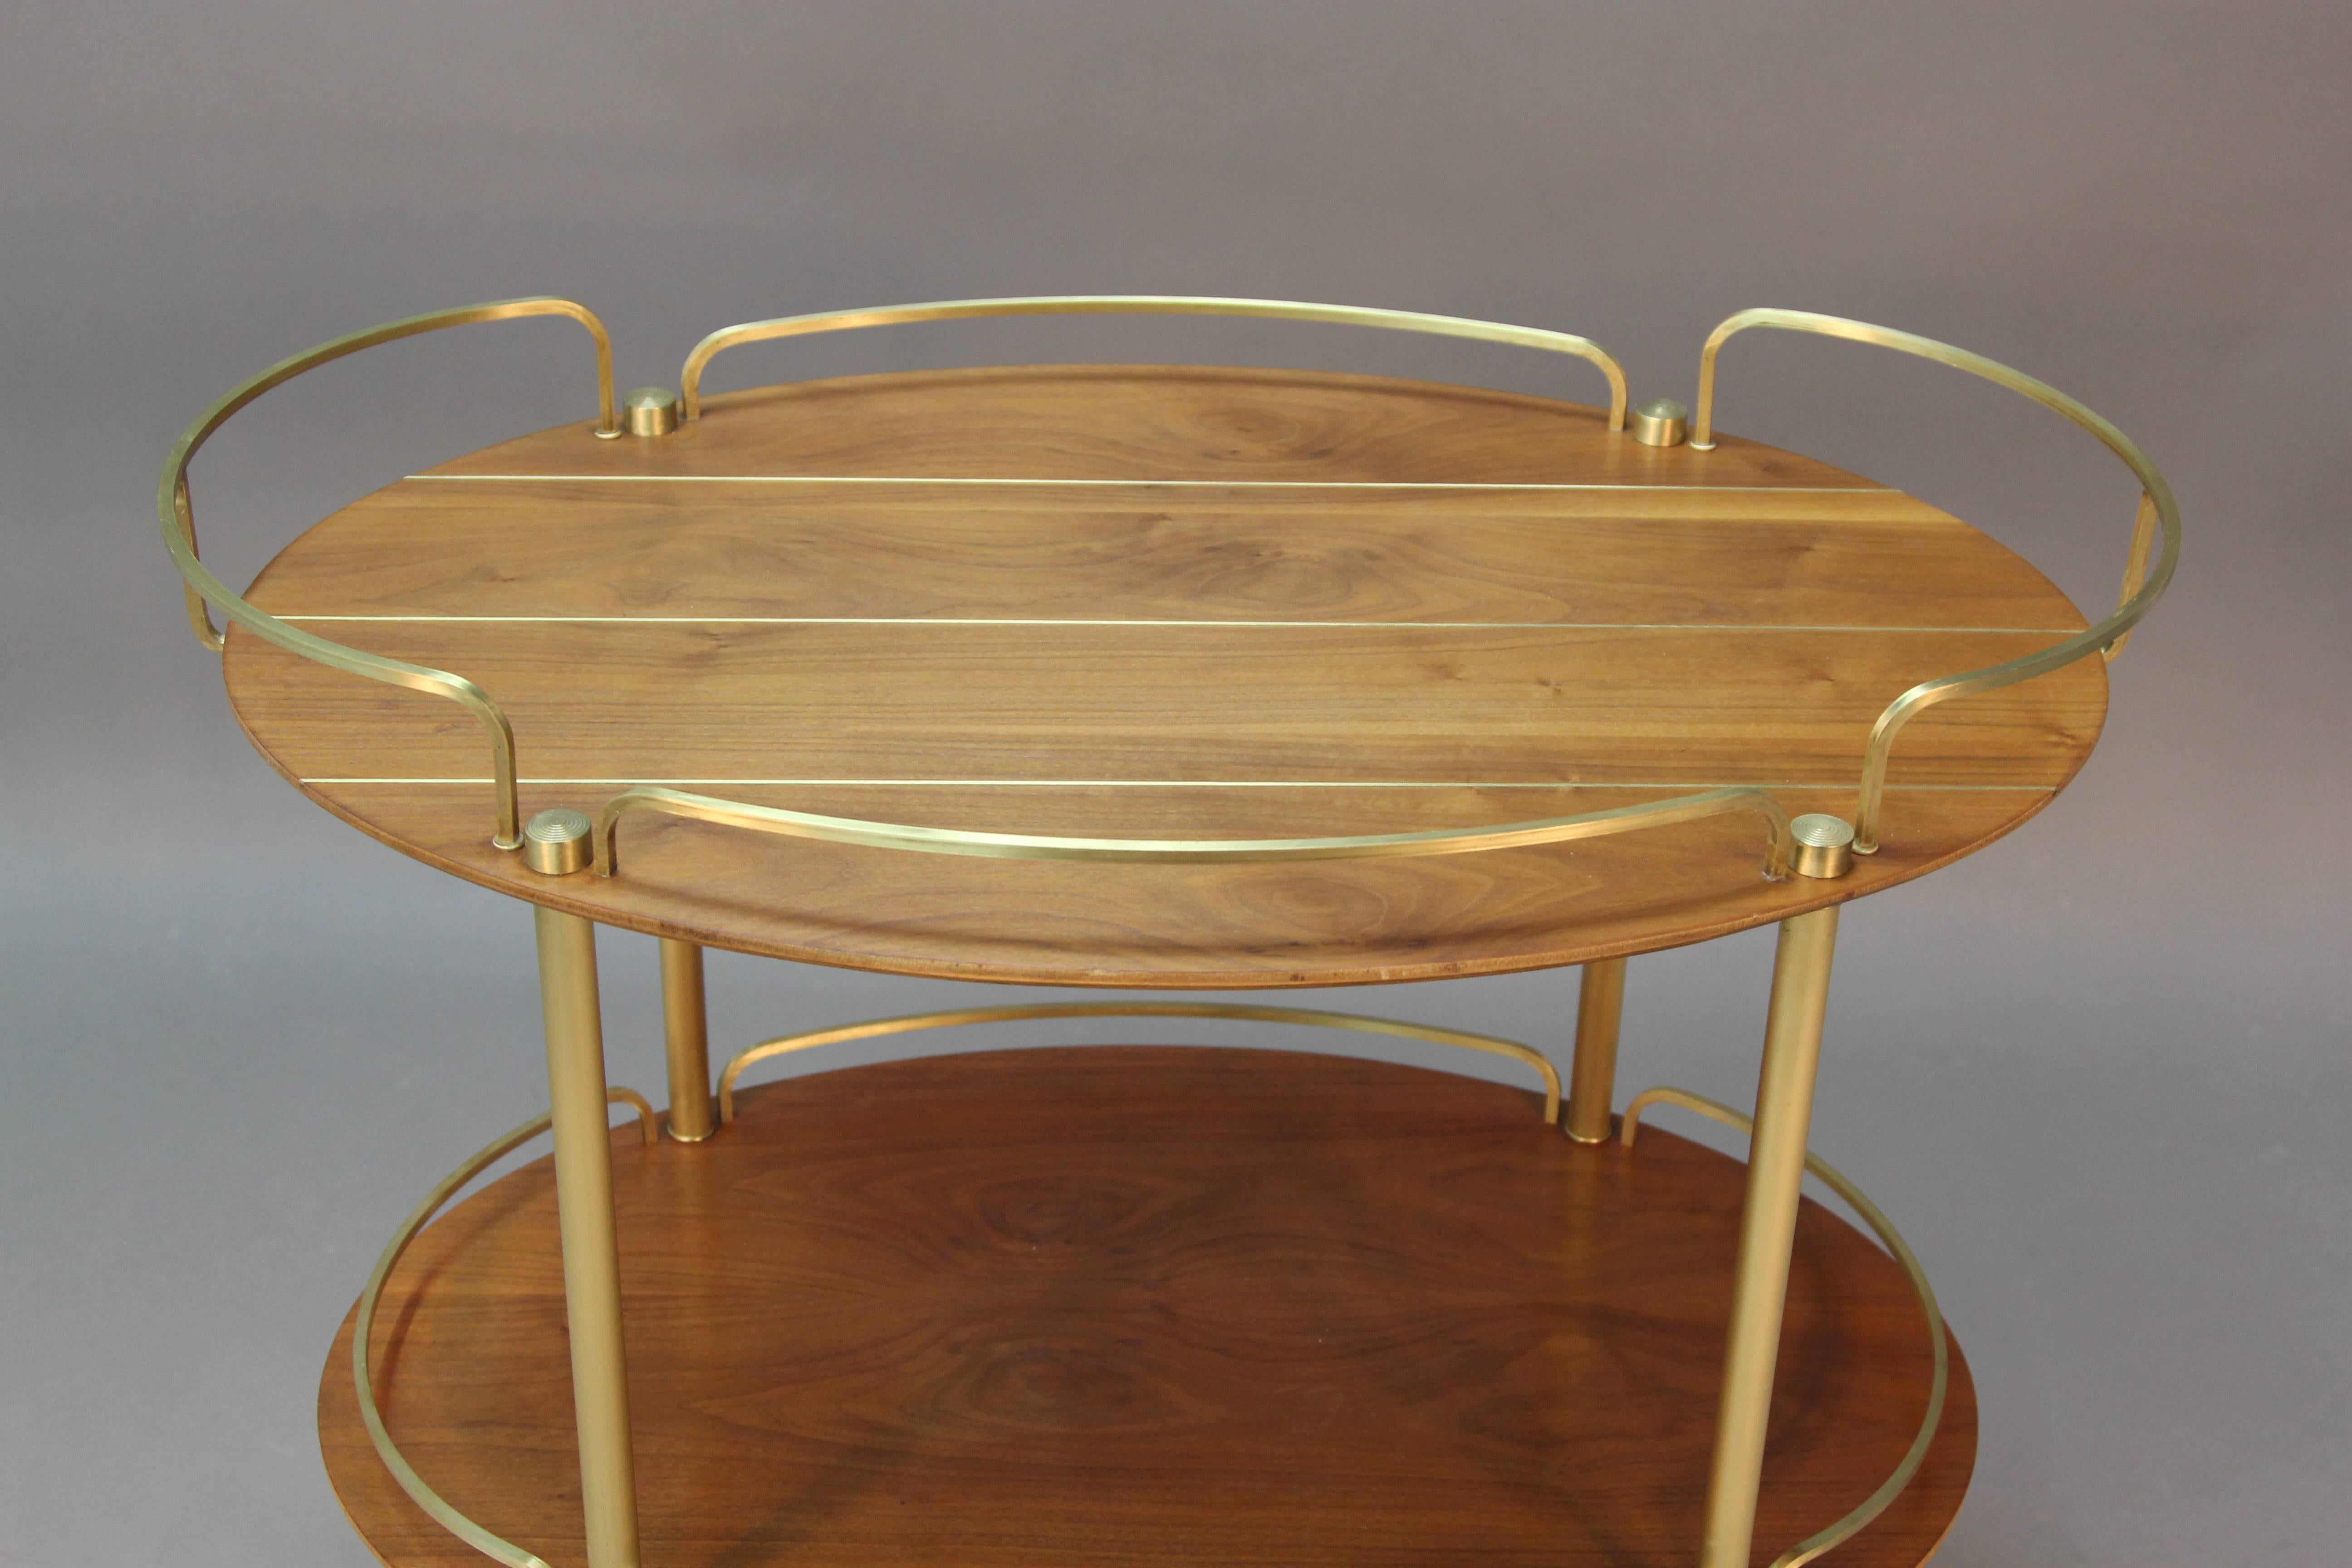 Don Draper dreams of this Mid-Century Modern teak and brass bar cart. Super chic brass detail. A great surfboard look made for martinis and Manhattans.